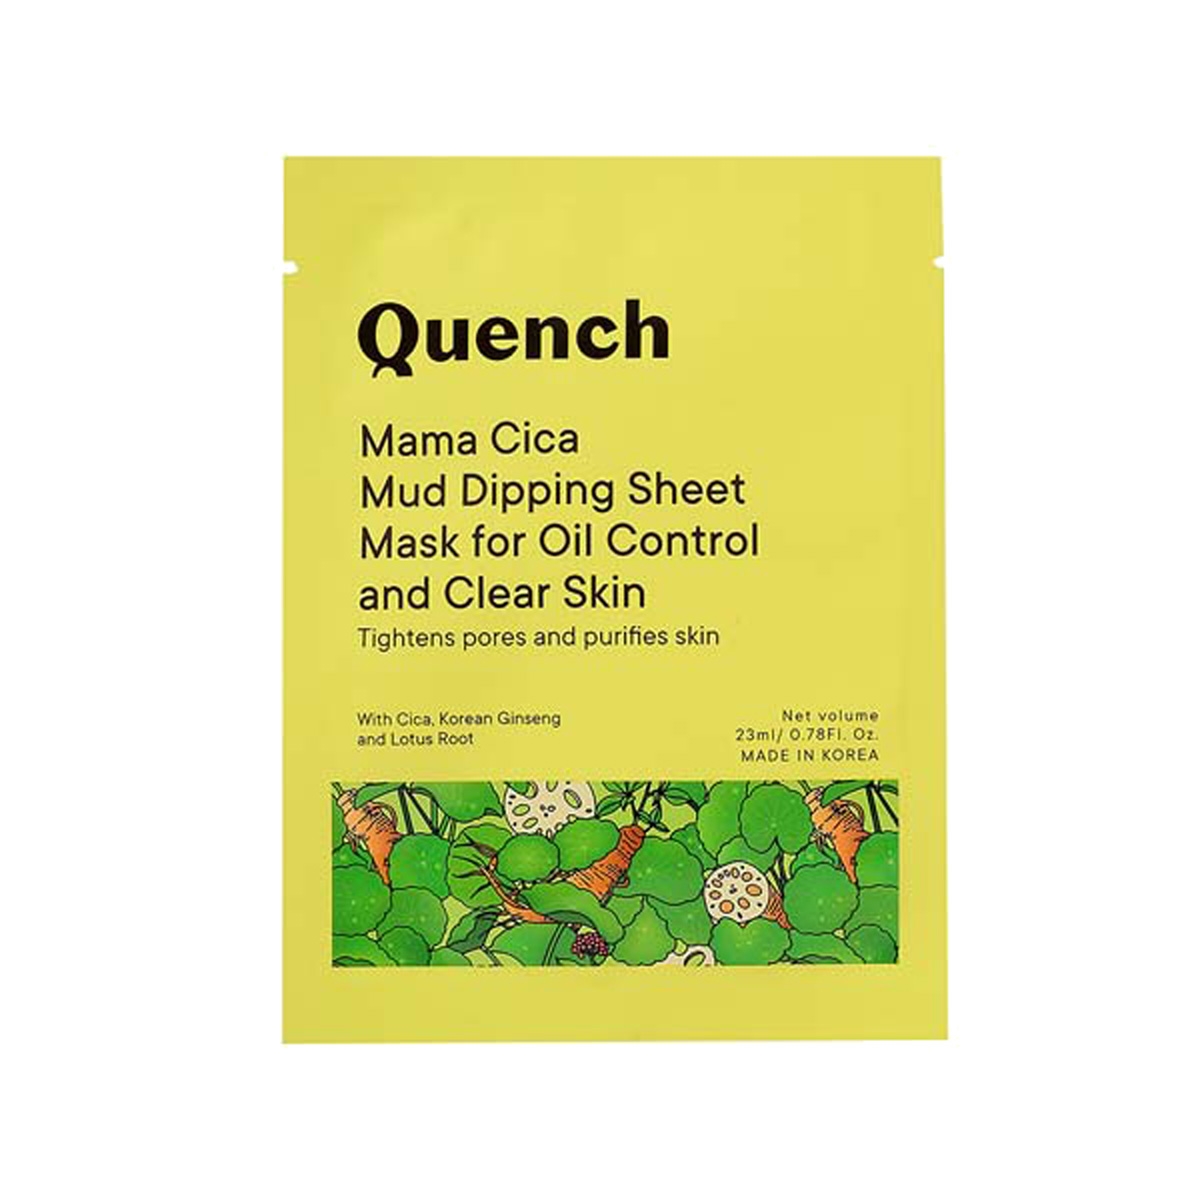 Quench Botanics | Quench Botanics Mama Cica Mud Dipping Sheet Mask for Oil Control and Clear Skin (23ml)